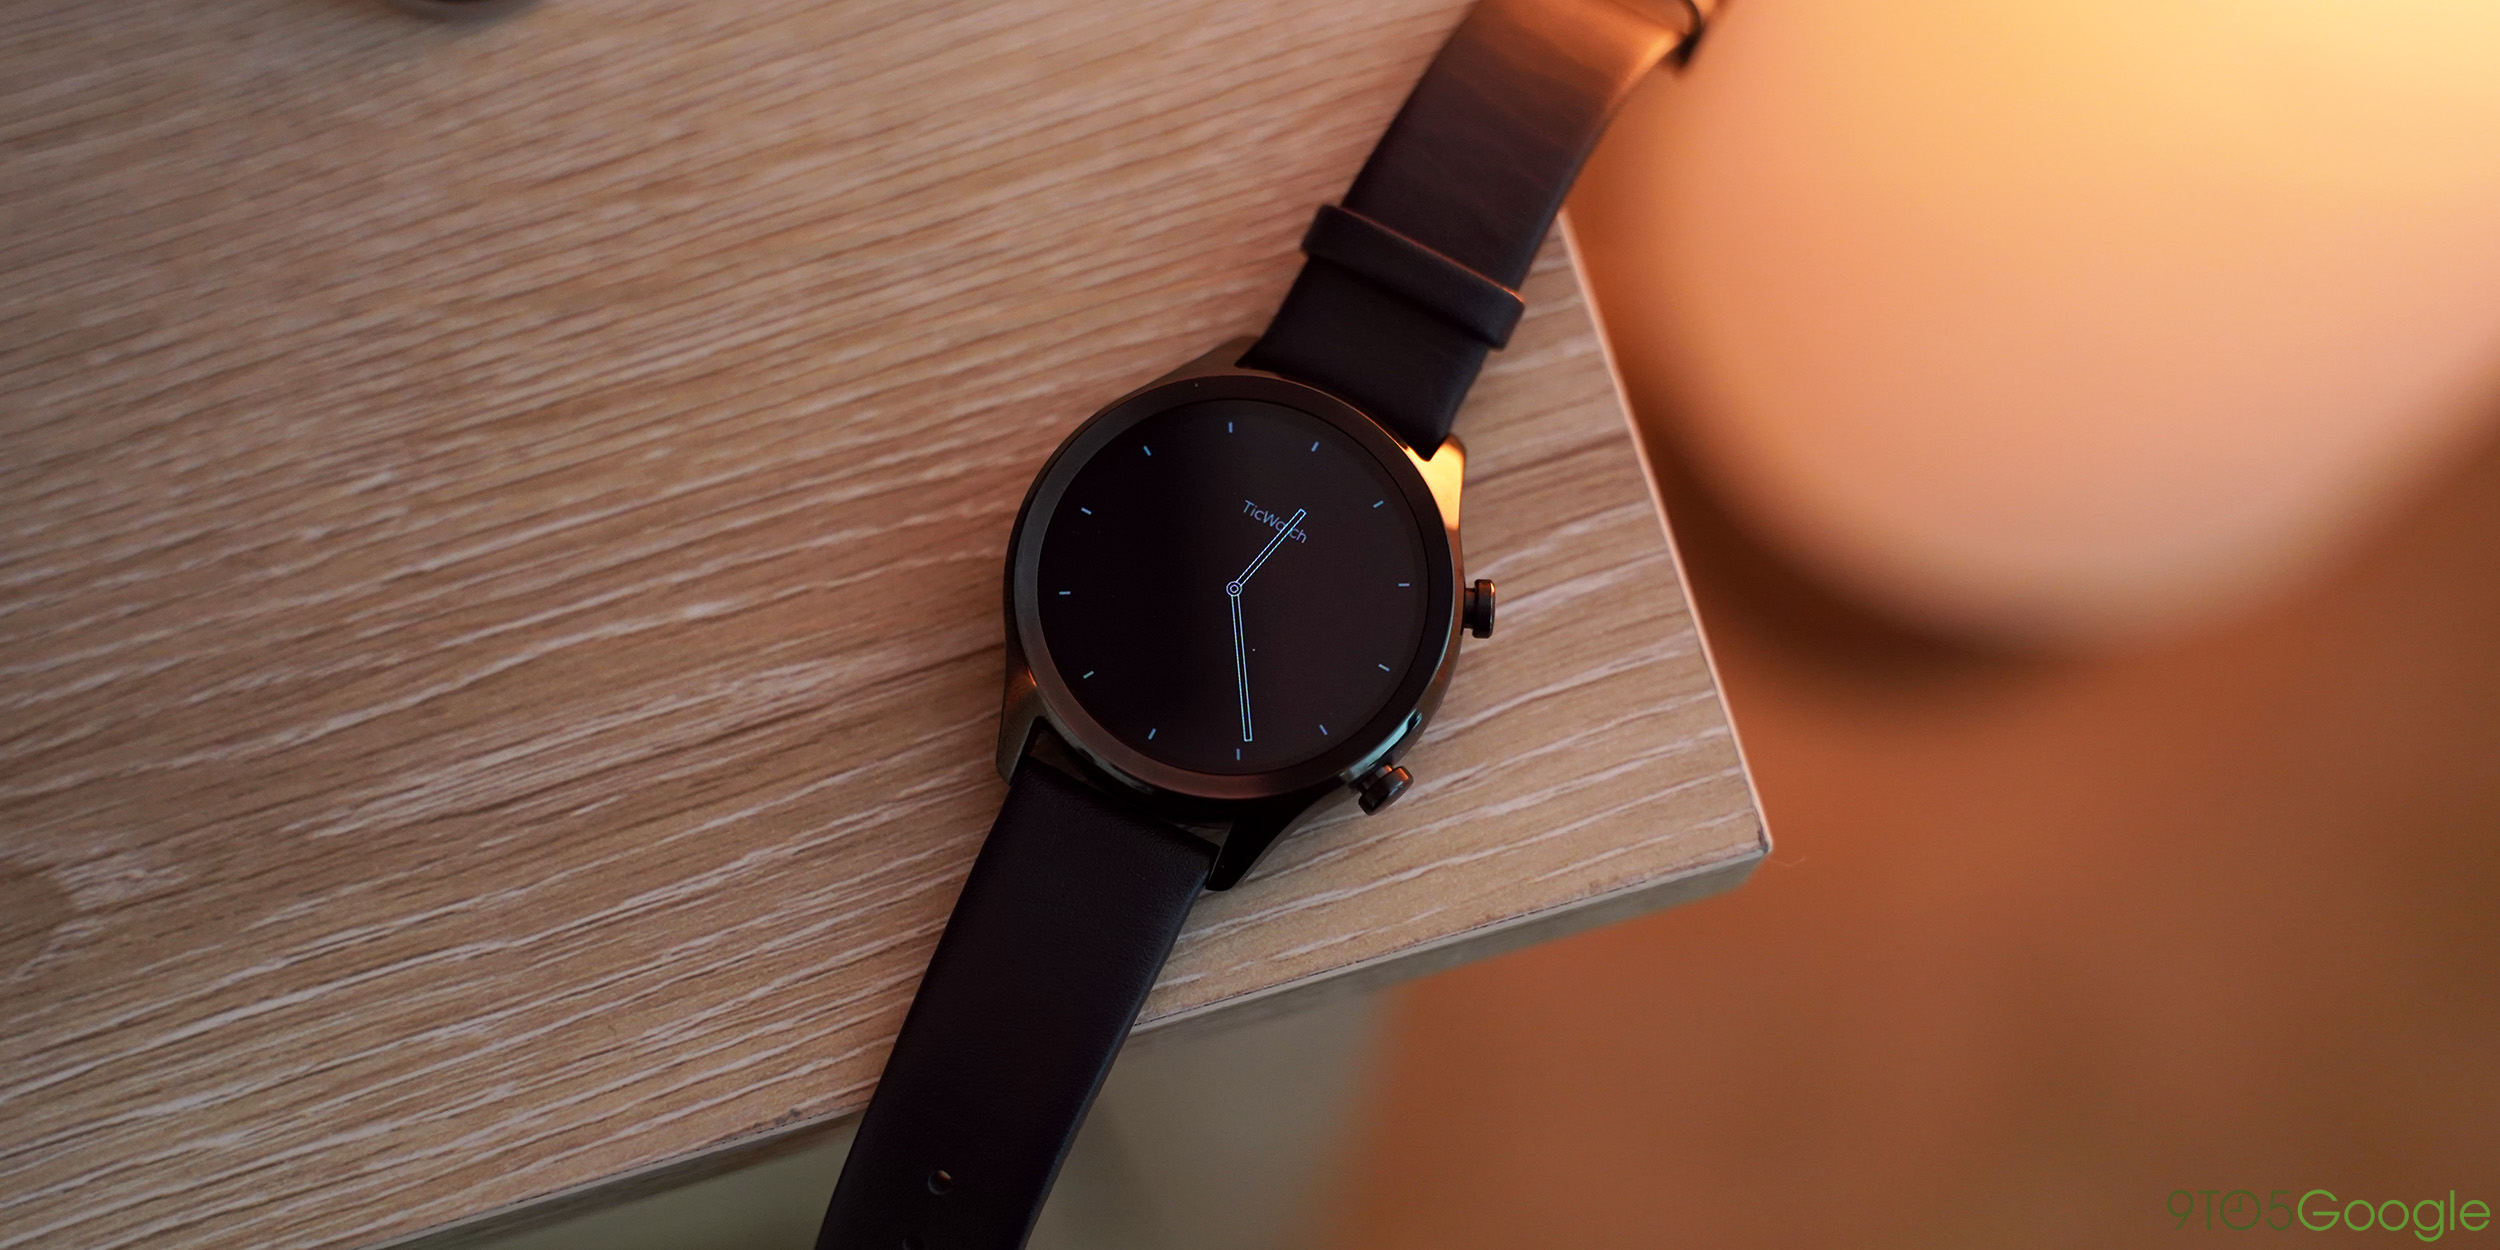 Hands on: Mobvoi Ticwatch C2 Wear OS watch now on sale - 9to5Google